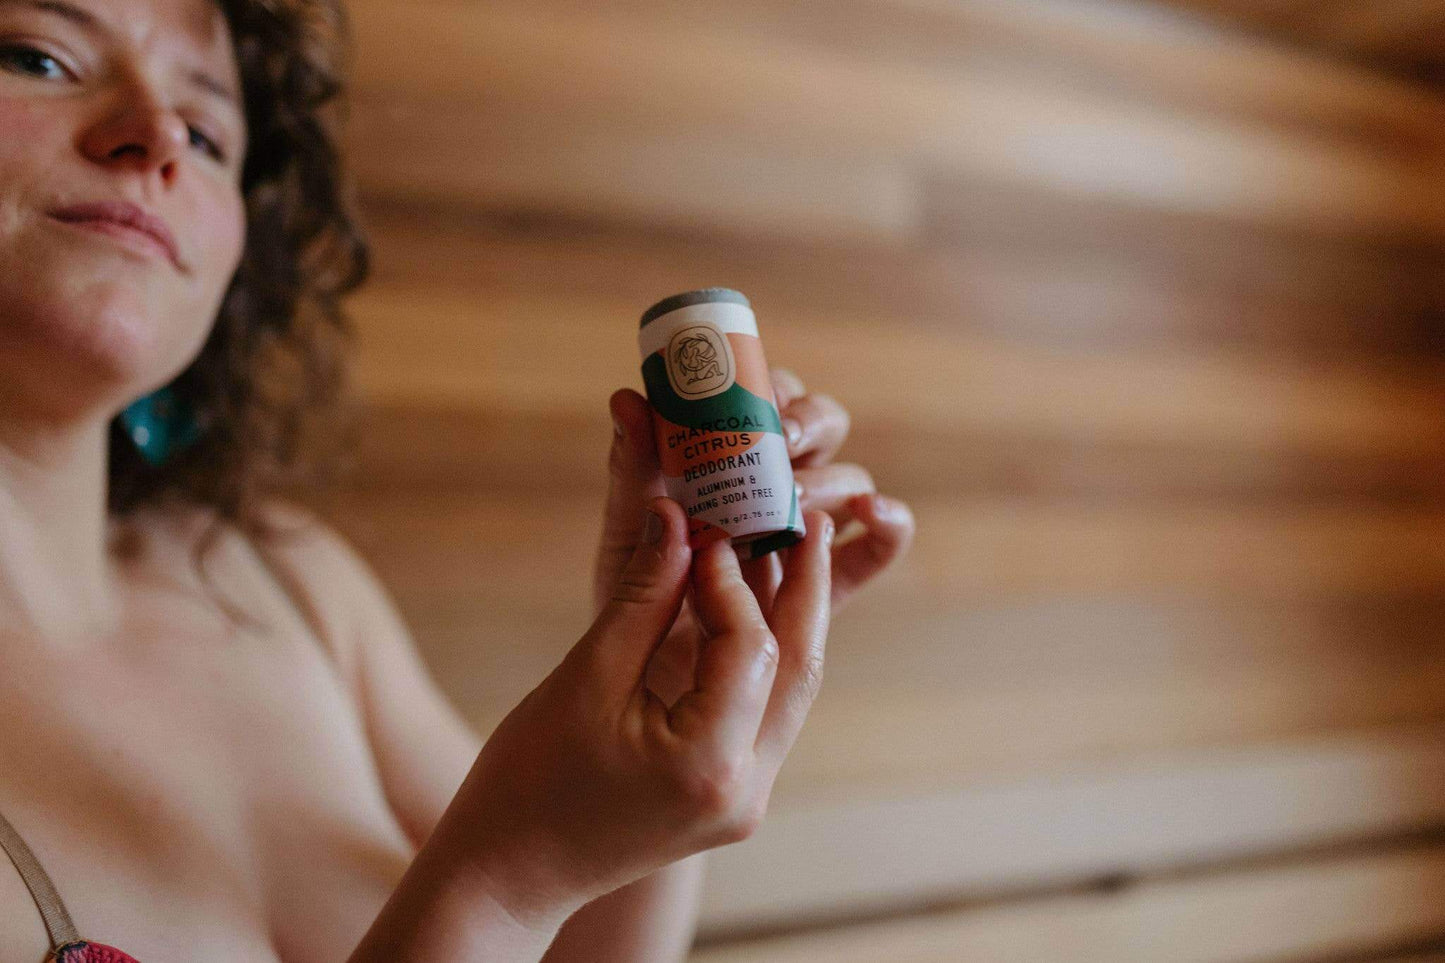 A girl holding an eco-friendly, non toxic charcoal citrus deodorant stick.